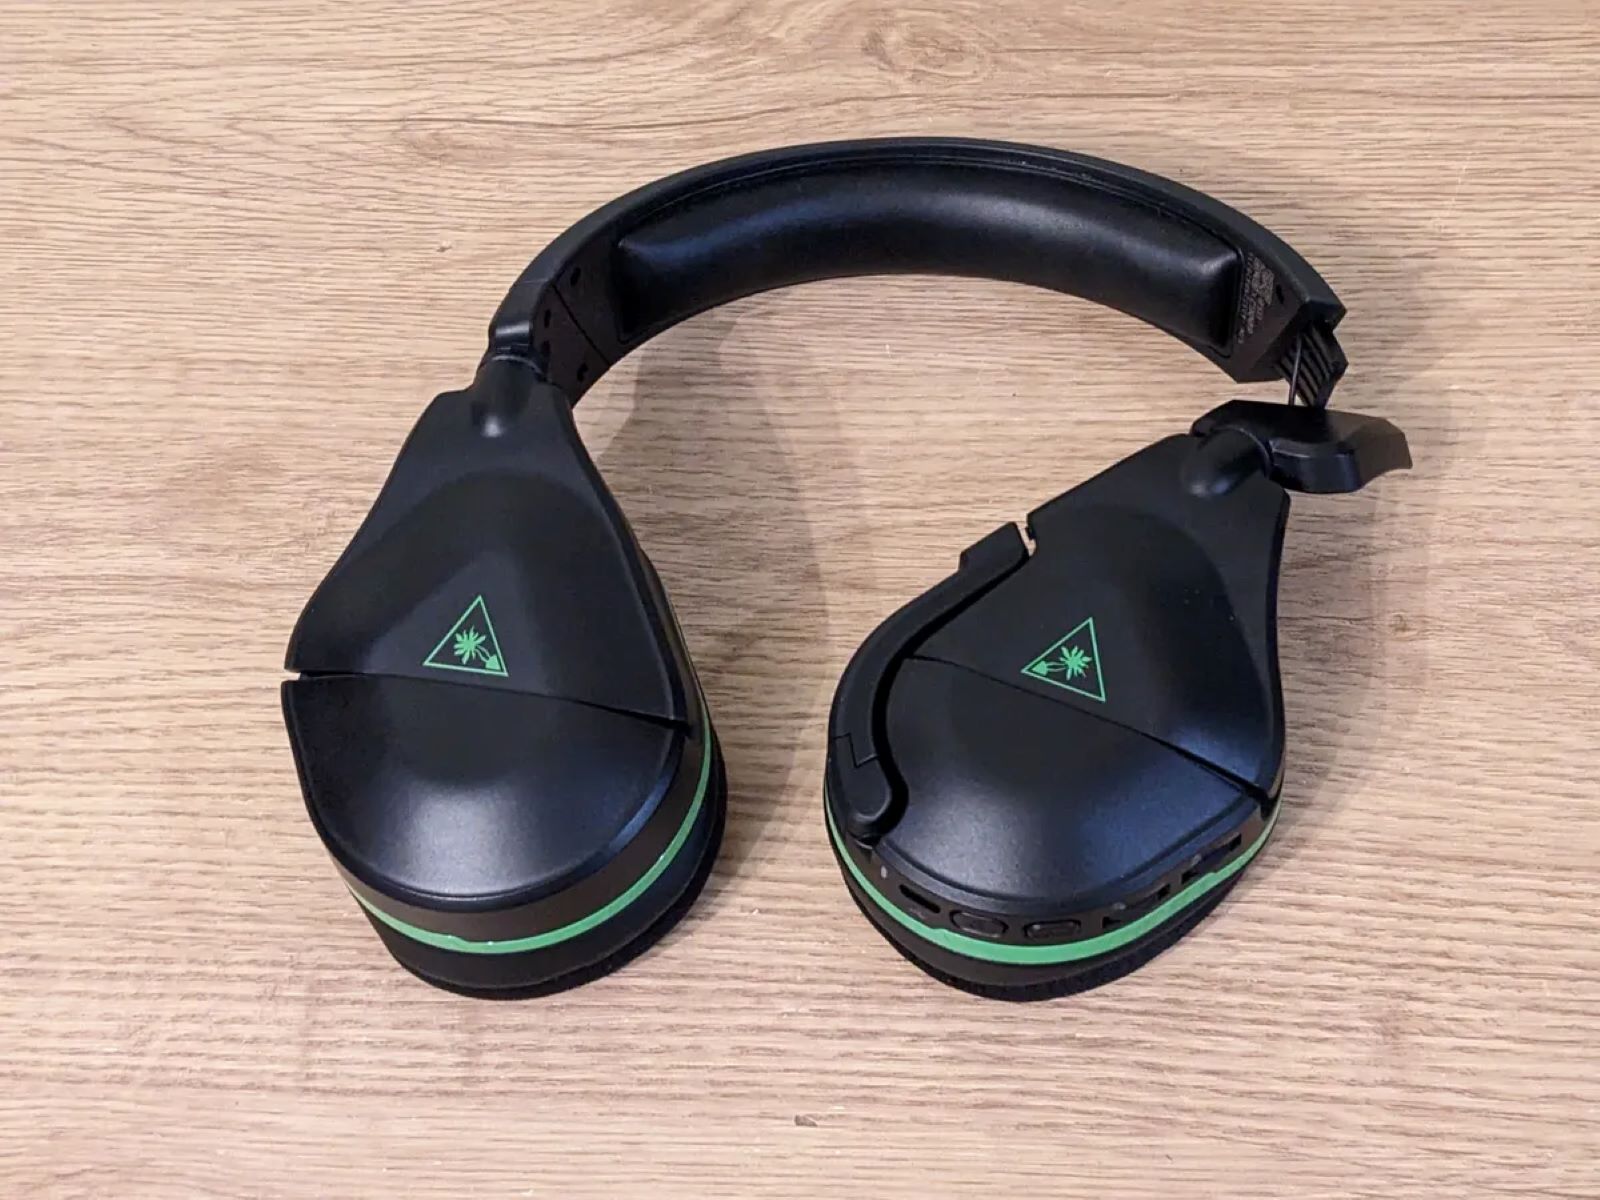 Resetting Your Turtle Beach Headset: Step-by-Step